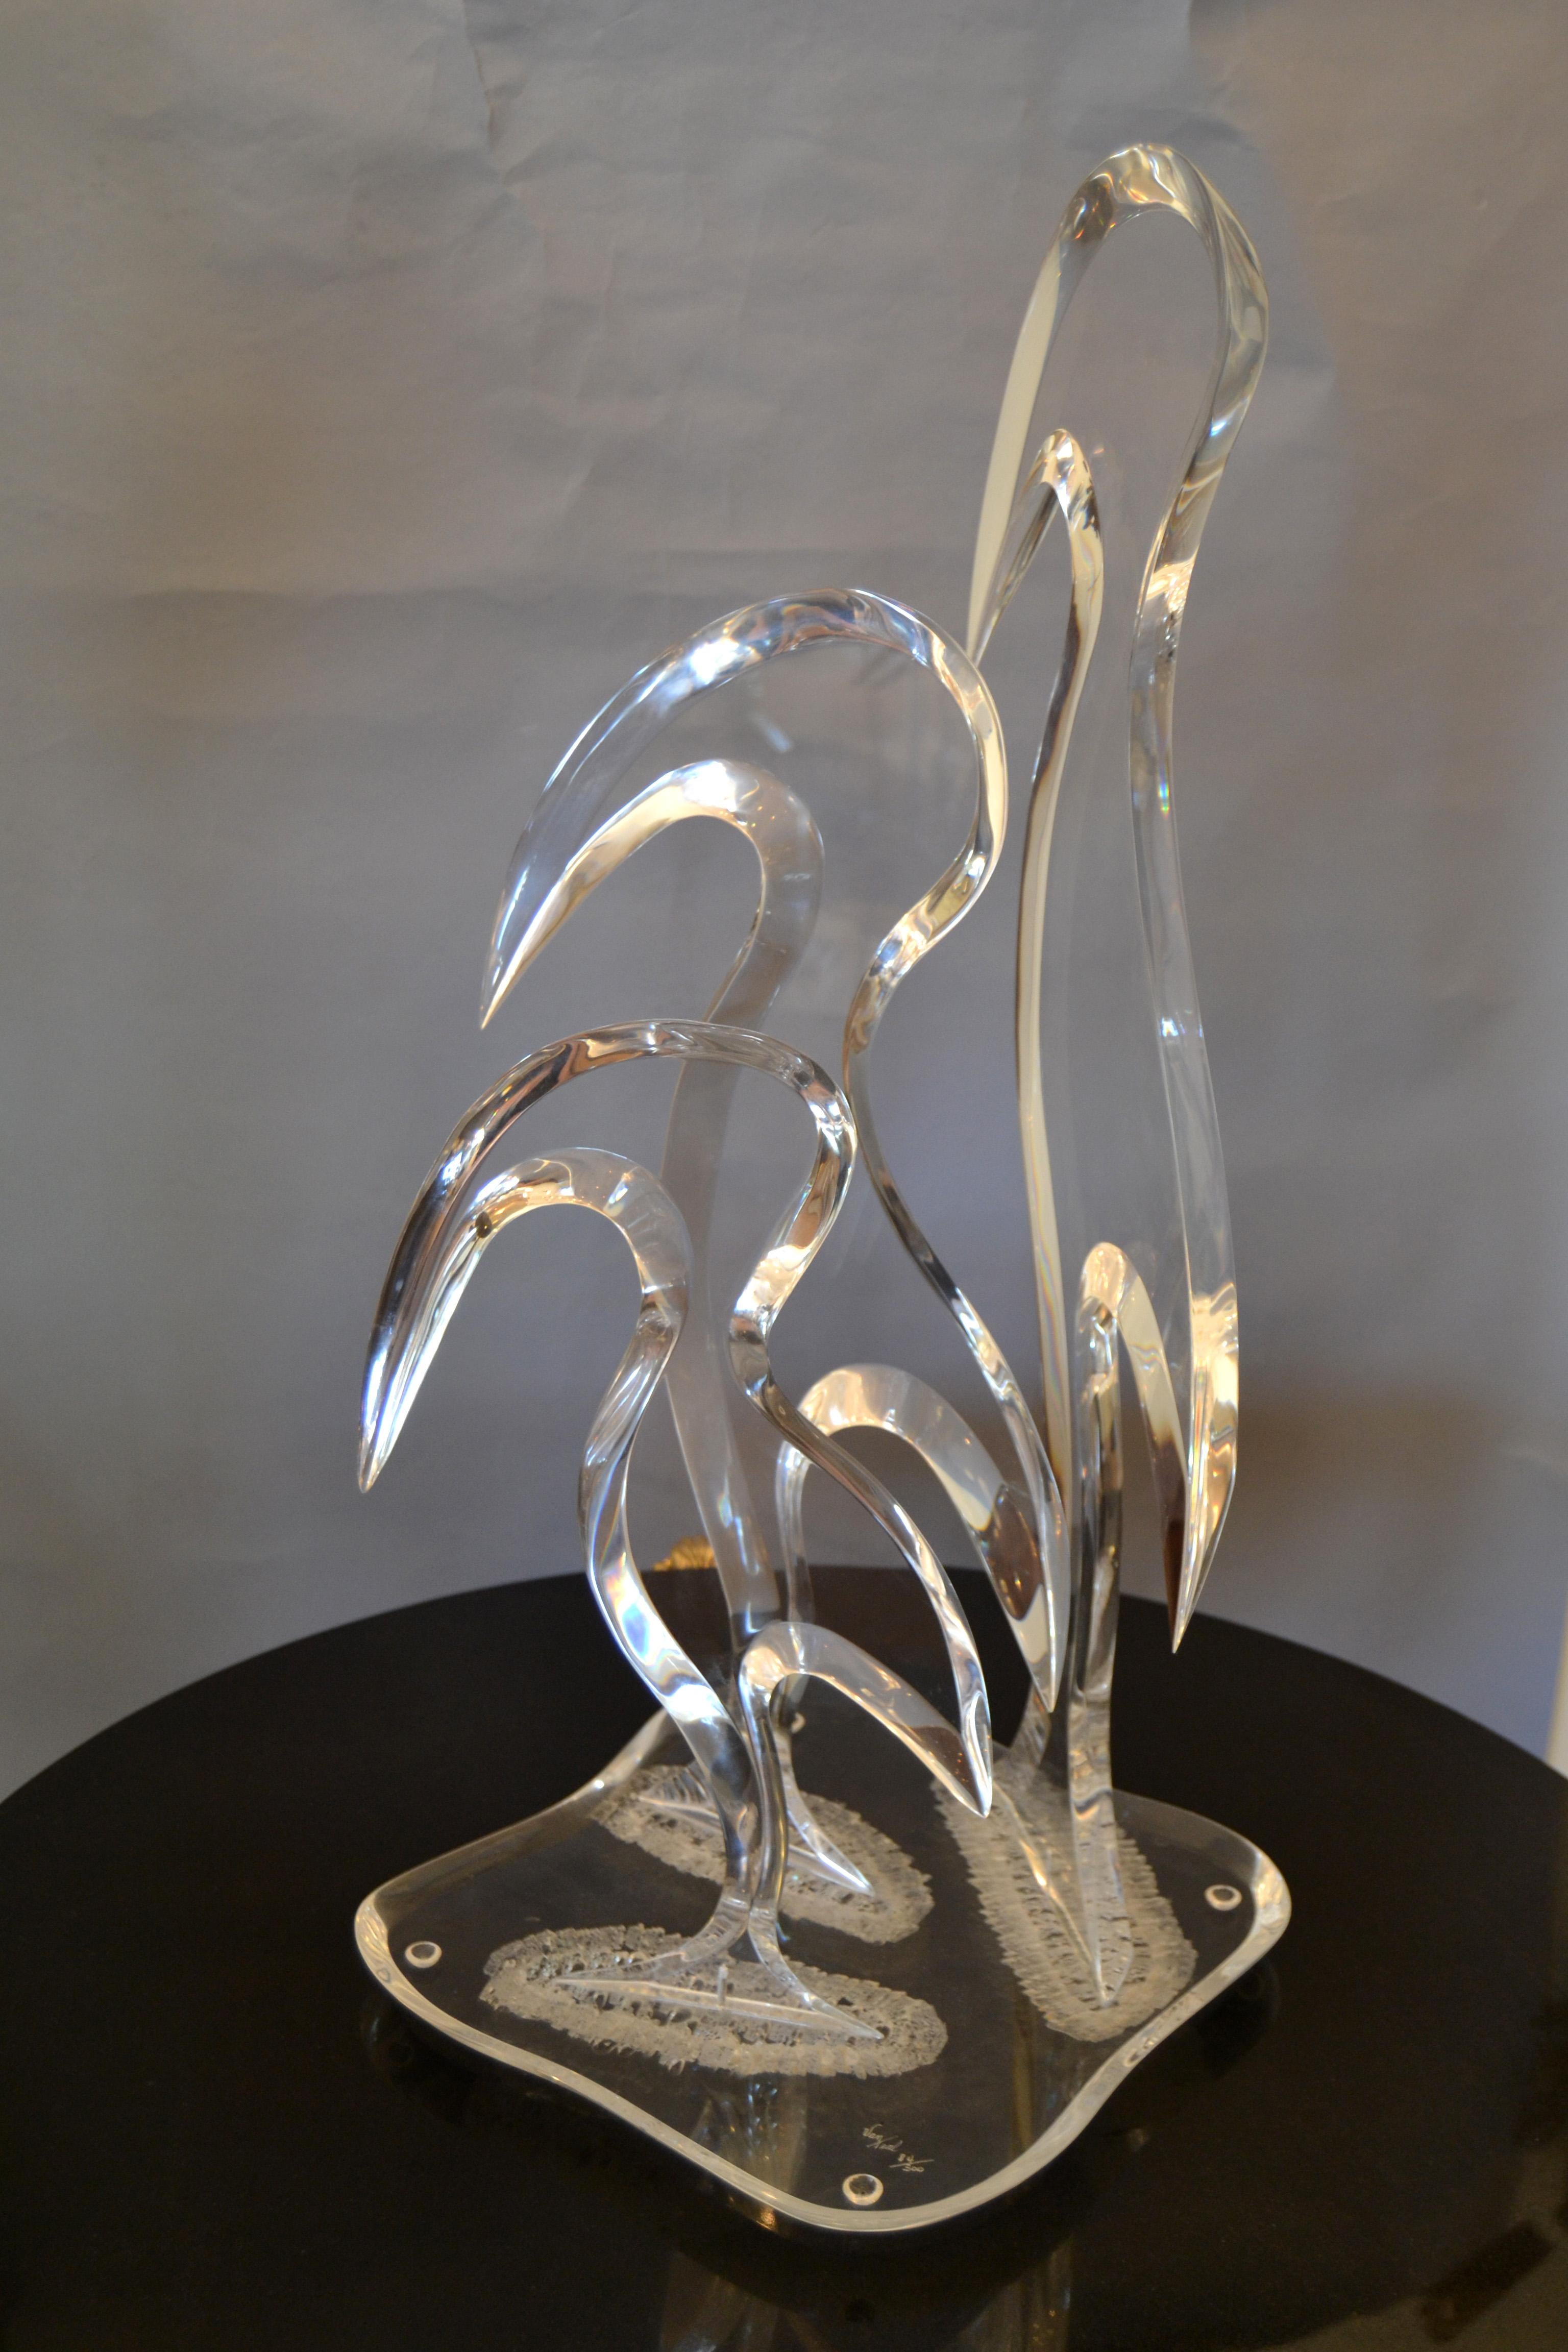 Modern Hivo G. van Teal Lucite Table Sculpture modeled as three stylized birds.
It is signed on the base and numbered 84/300. The Lucite Birds are 1.38 inches thick. 
The sculpture looks interesting from every angle.
   